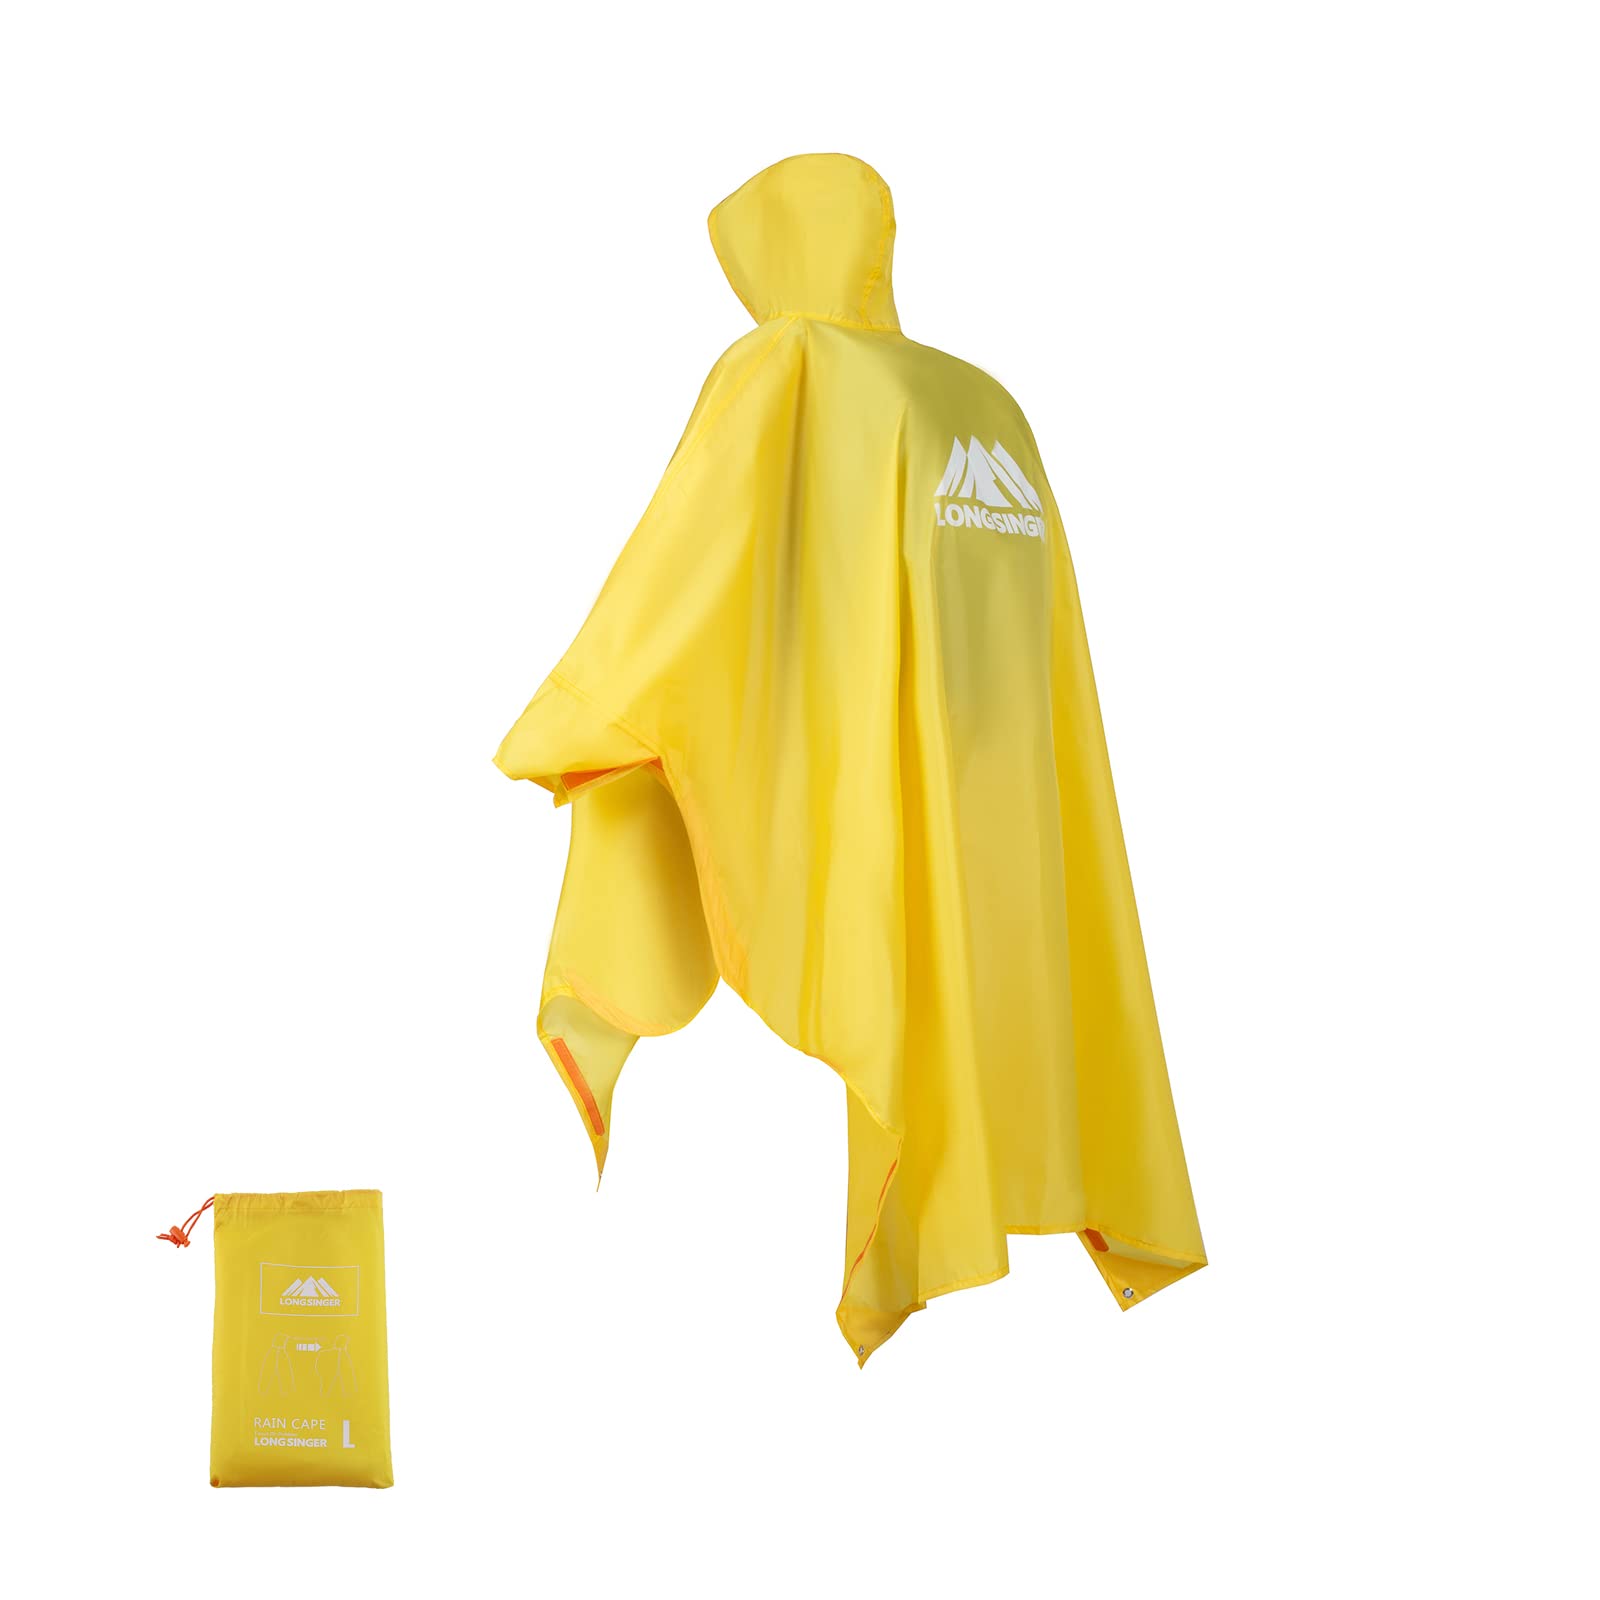 longsinger Rain Ponchos for Adults, Waterproof Rain Poncho with Hood and Arms for Hiking, Hunting, Outdoor, Golden